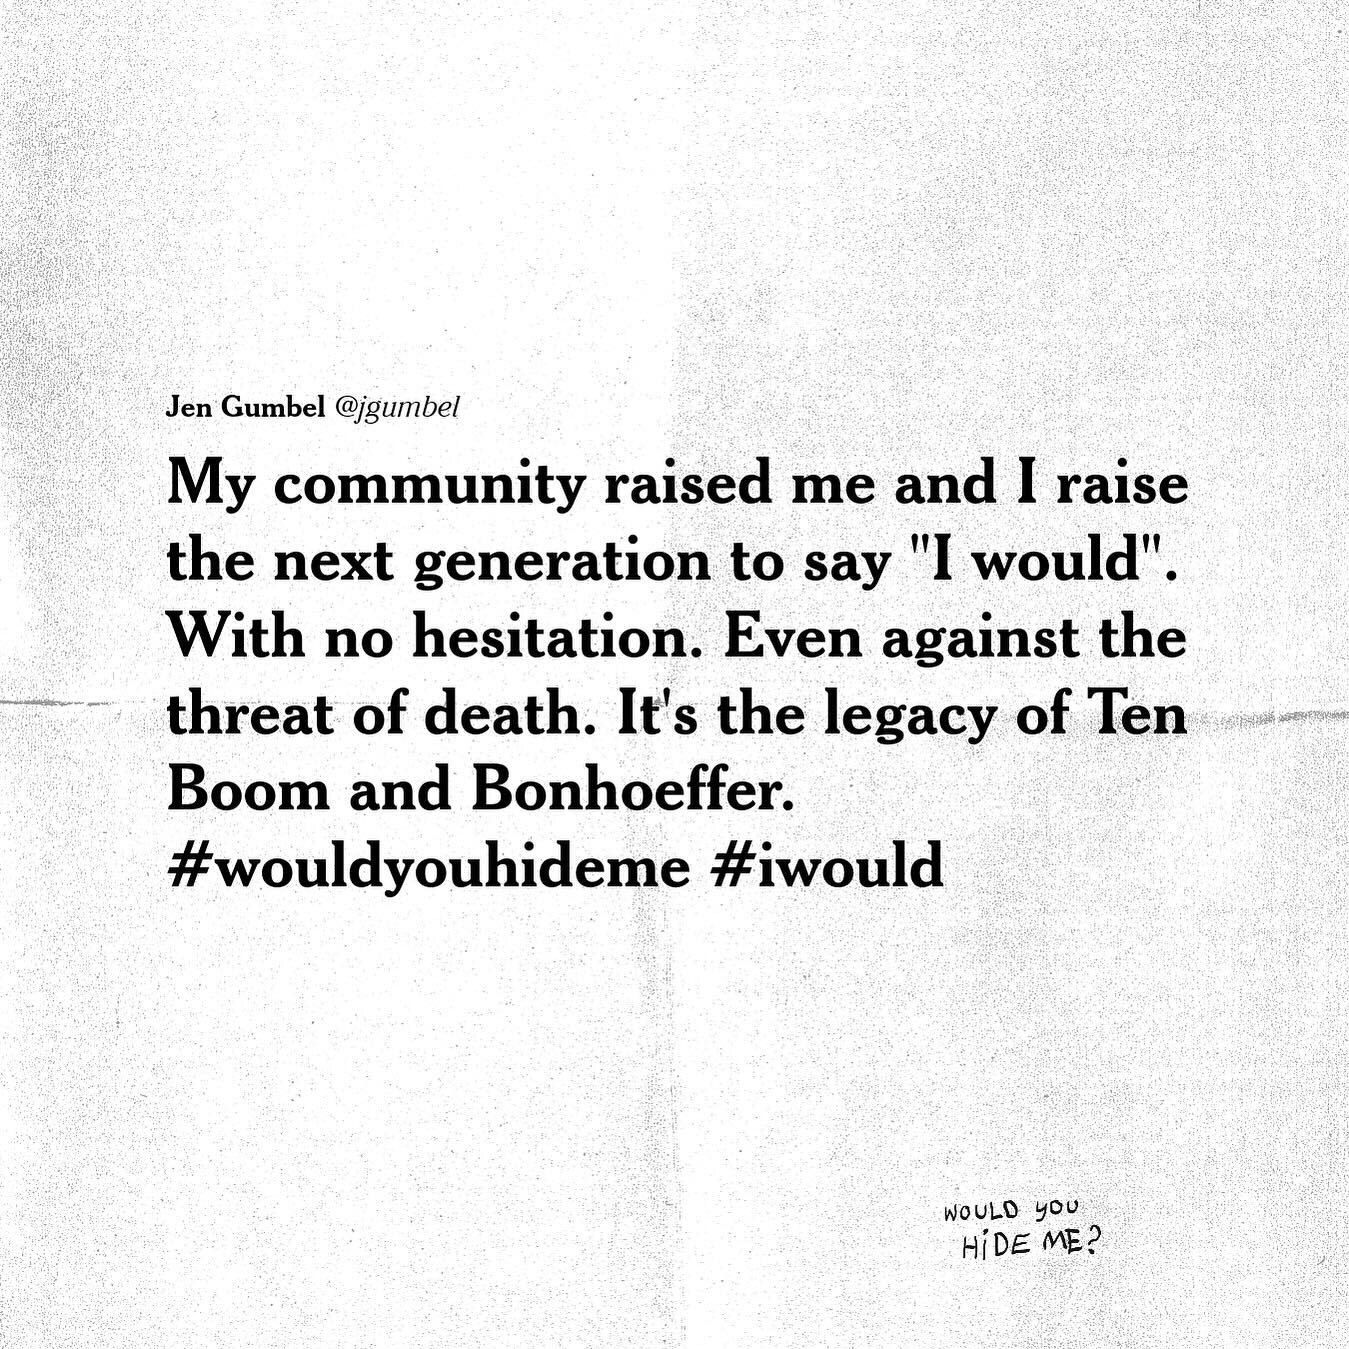 Jen Gumbel @jgumbel
My community raised me and I raise the next generation to say &quot;I would&quot;.
With no hesitation. Even against the threat of death. It's the legacy of Ten Boom and Bonhoeffer.
#wouldyouhideme #iwould